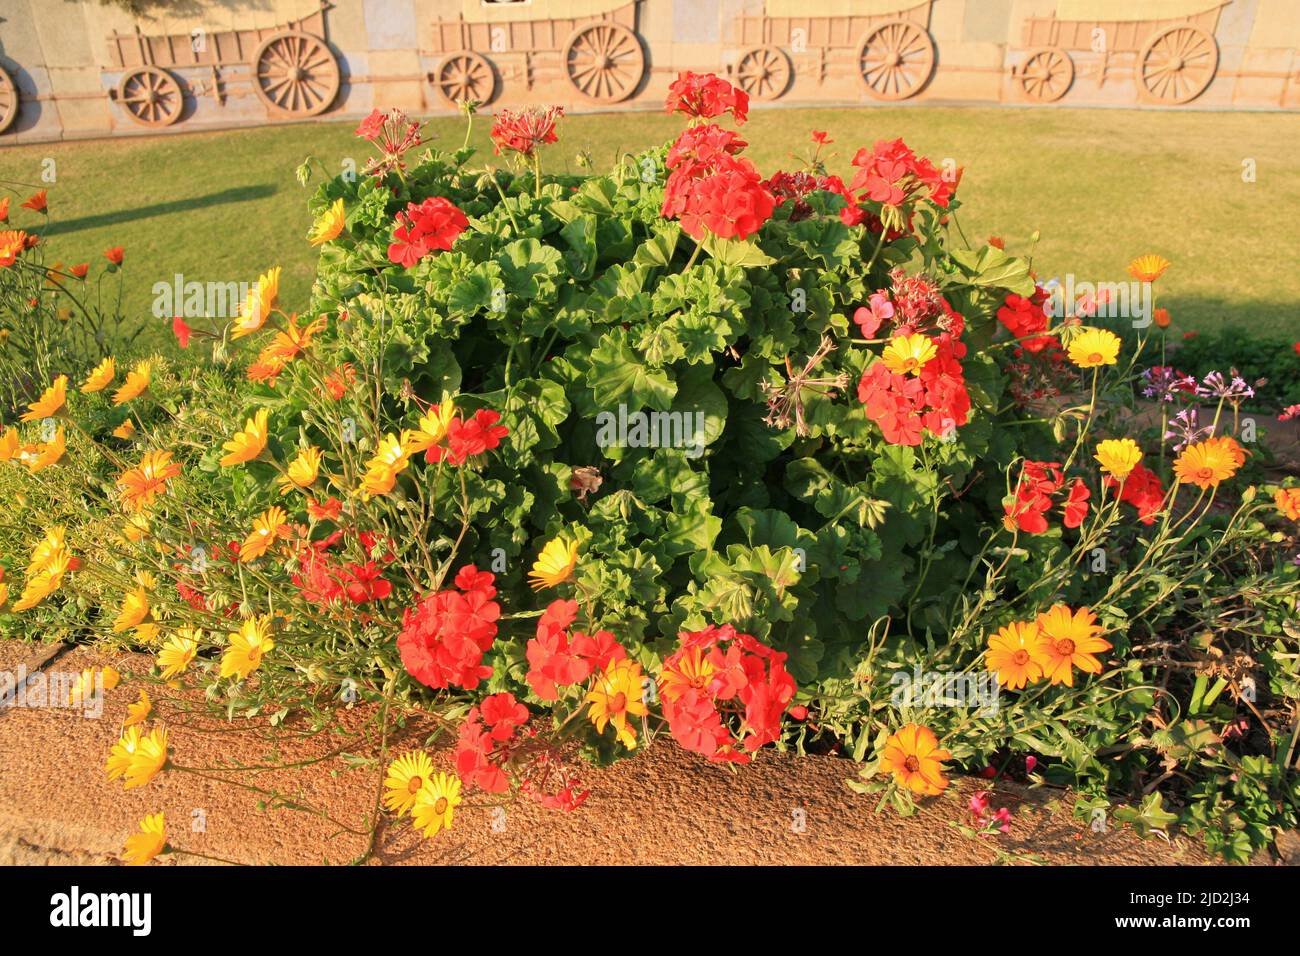 Geraniums and namaqualand daisies with ox cart reliefs on wall, Voortrekker Monument Museum, Pretoria/Tshwane, Gauteng, South Africa. Stock Photo